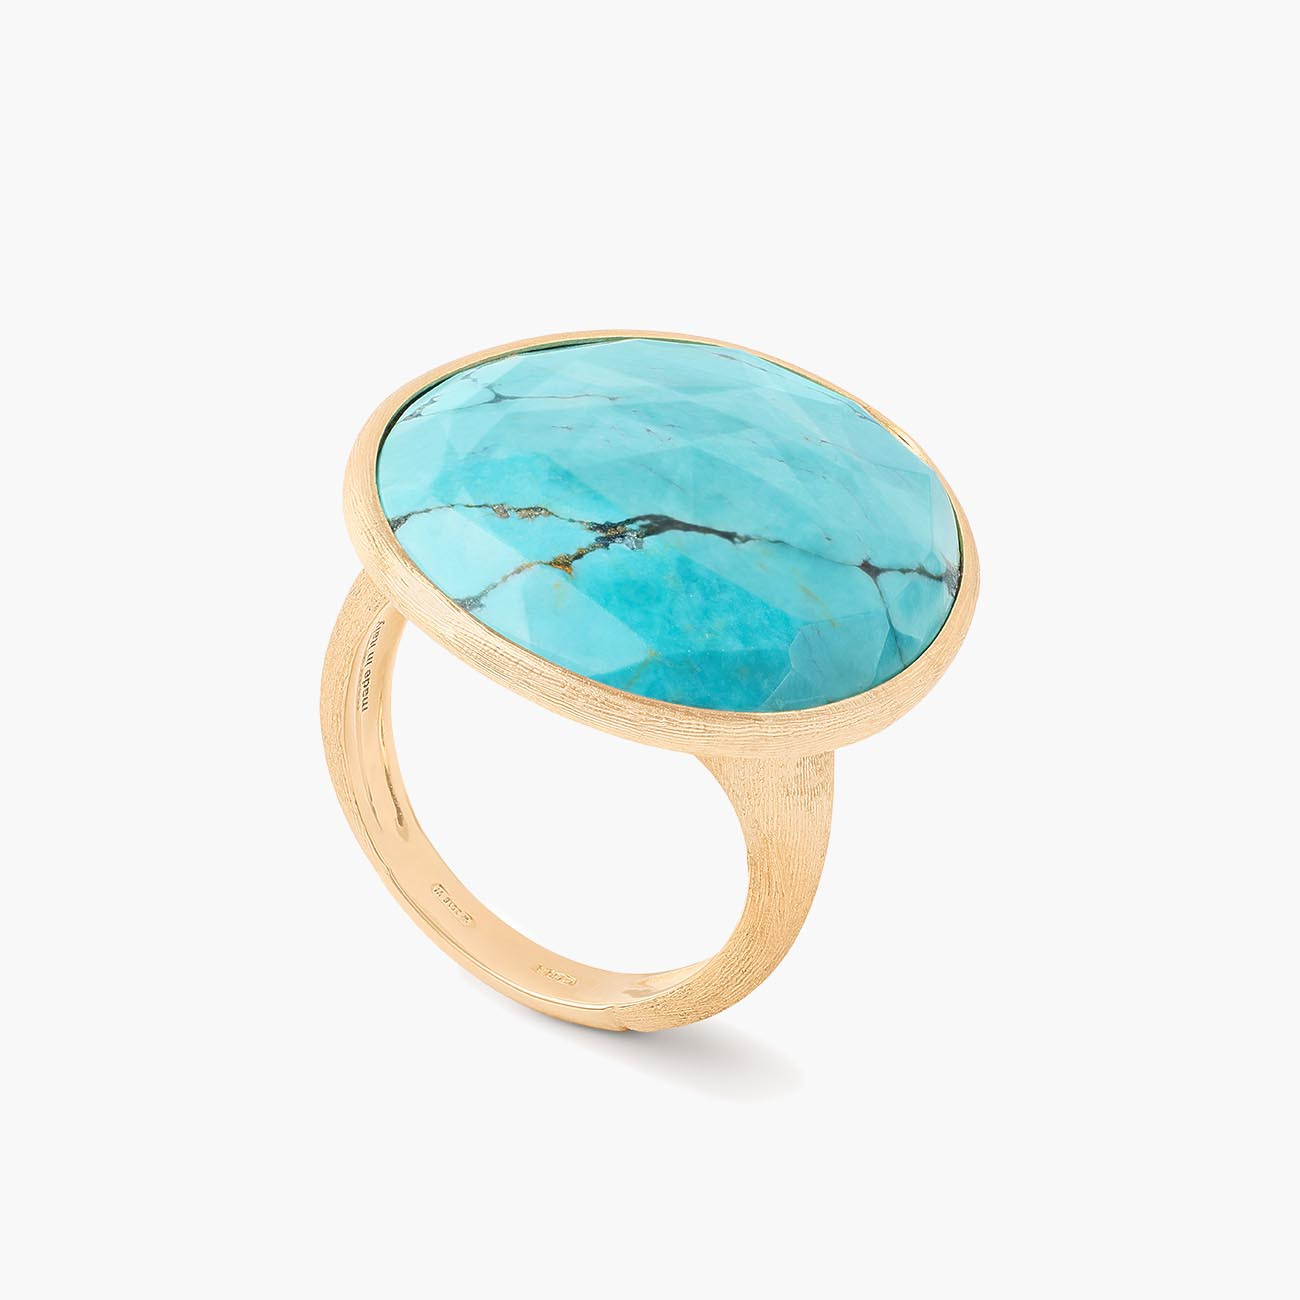 Marco Bicego Lunaria Turquoise Gold Cocktail Ring